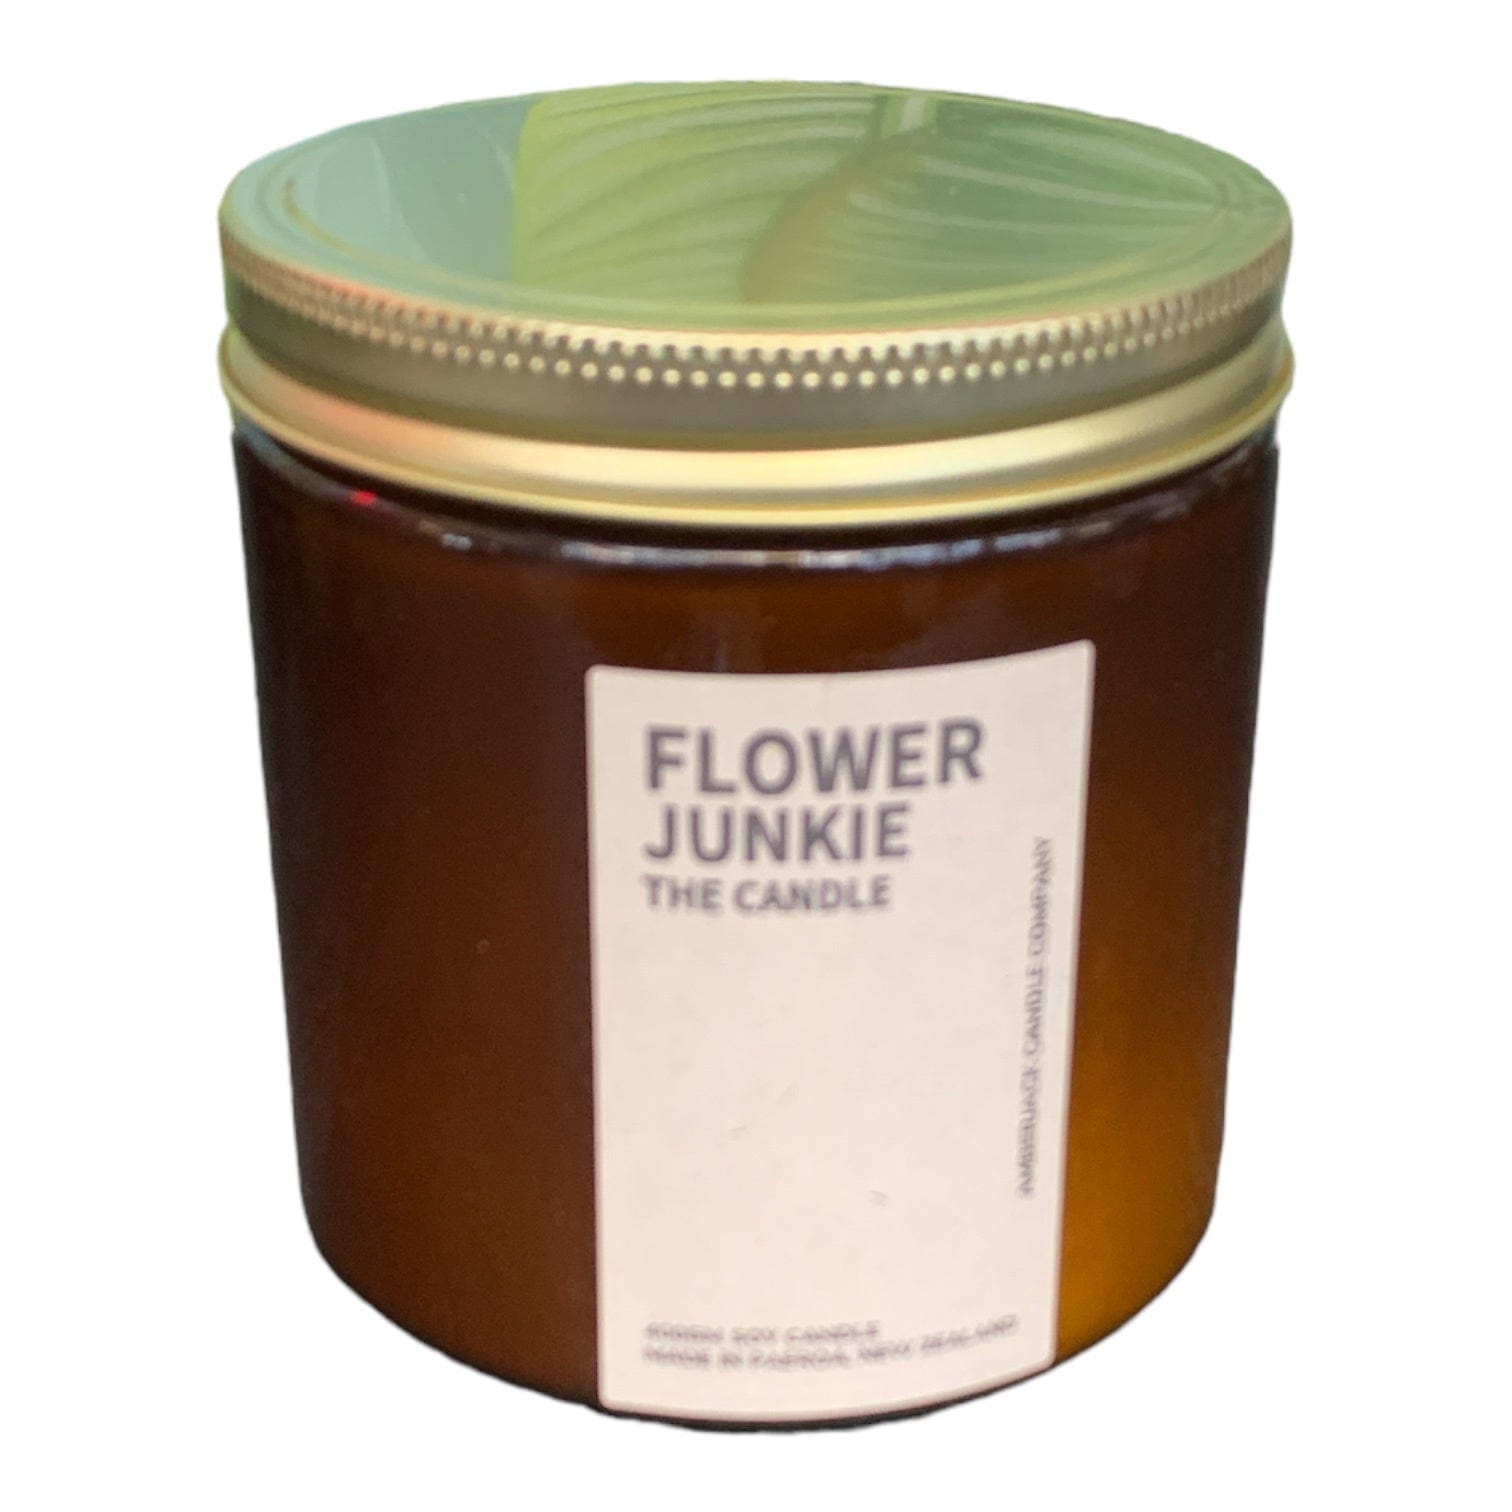 Flower Junkie Soy Candle Large